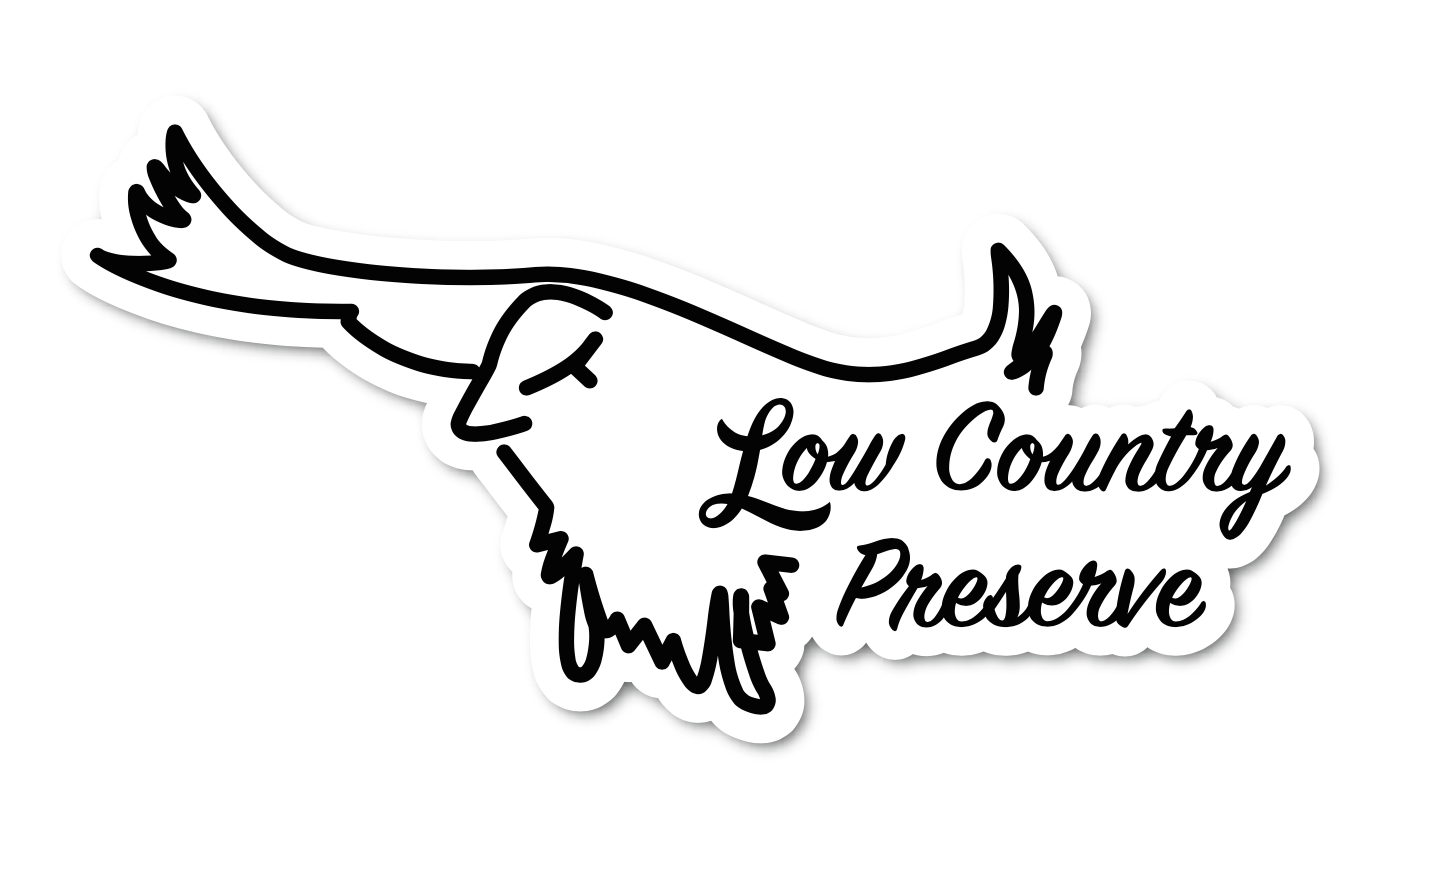 Low Country Preserve Die-Cut Sticker